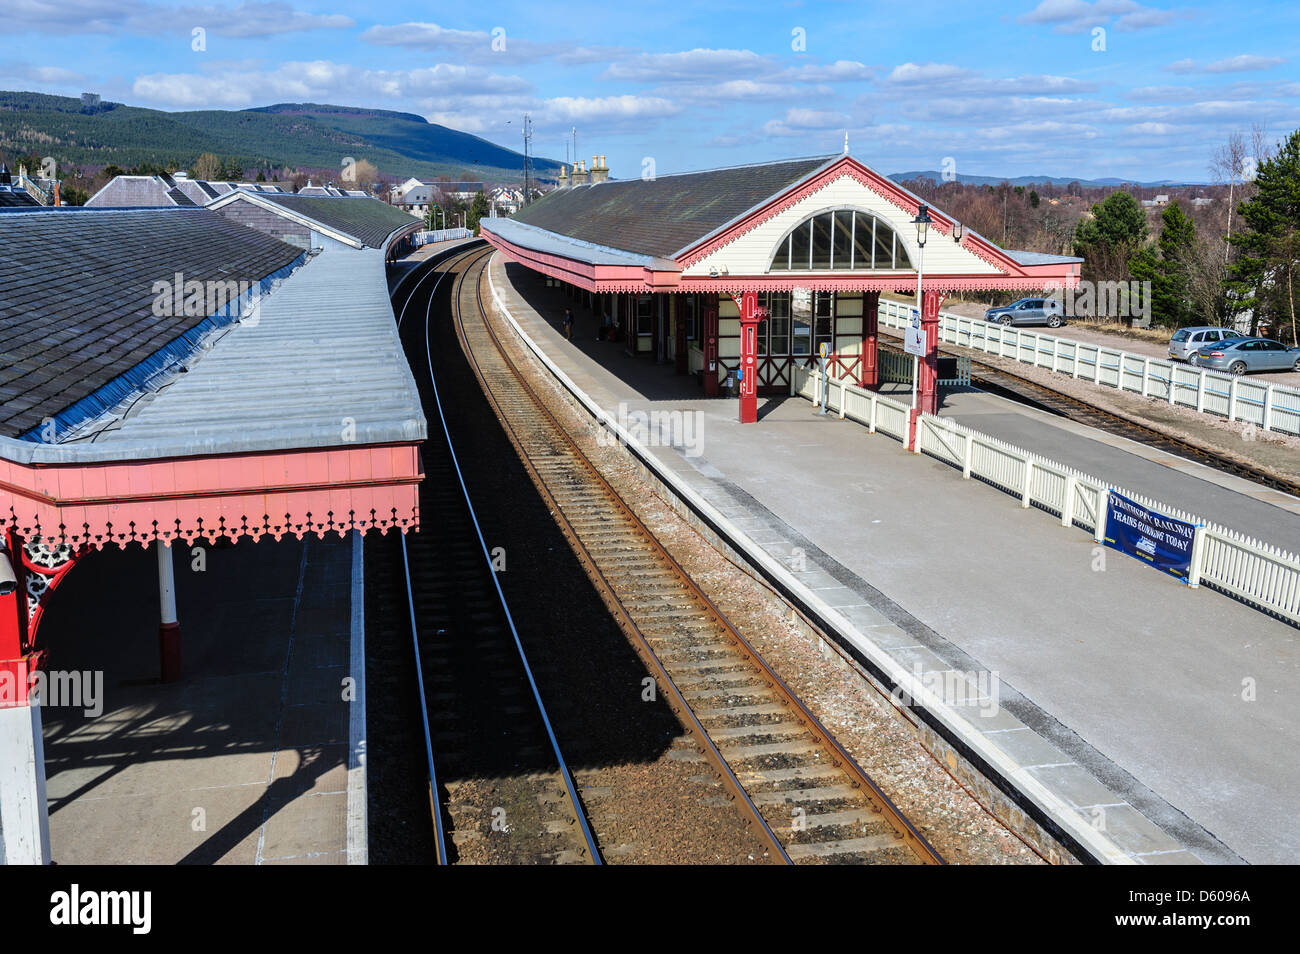 Aviemore railway station serves the town and tourist resort of Aviemore in the Highlands of Scotland. Stock Photo